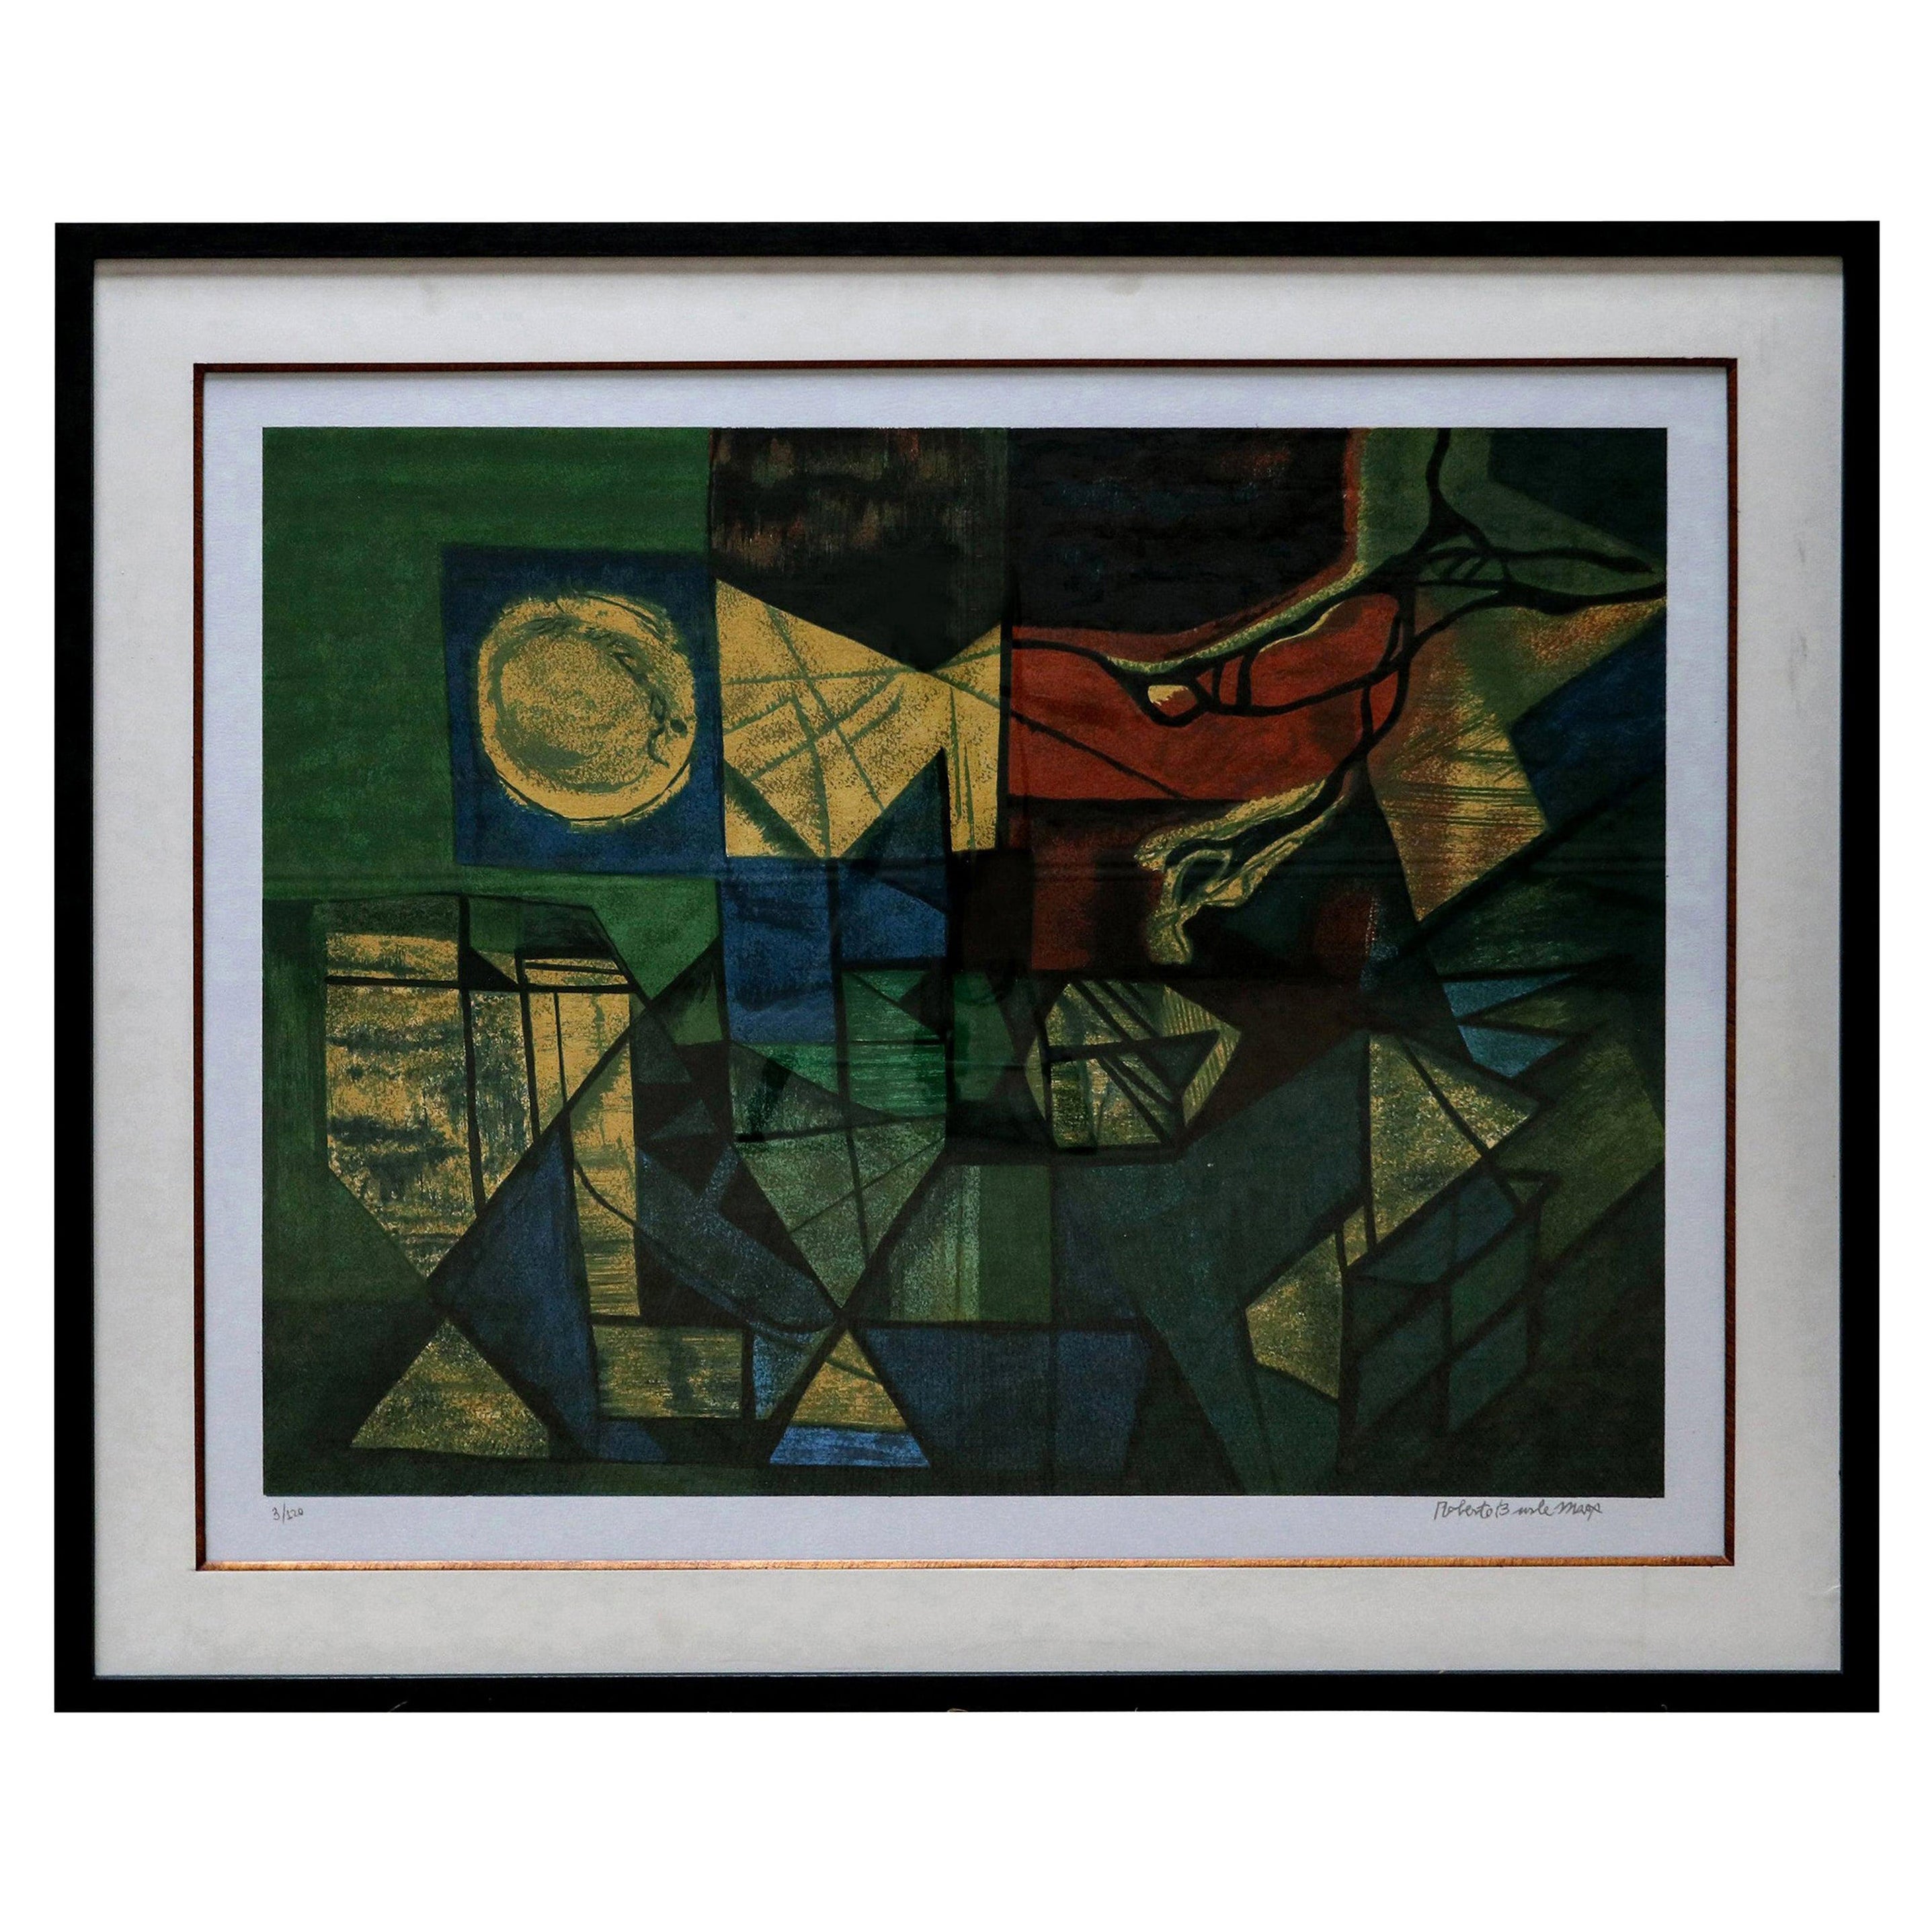 Roberto Burle Marx Abstract Print in Green and Yellow, 1960s